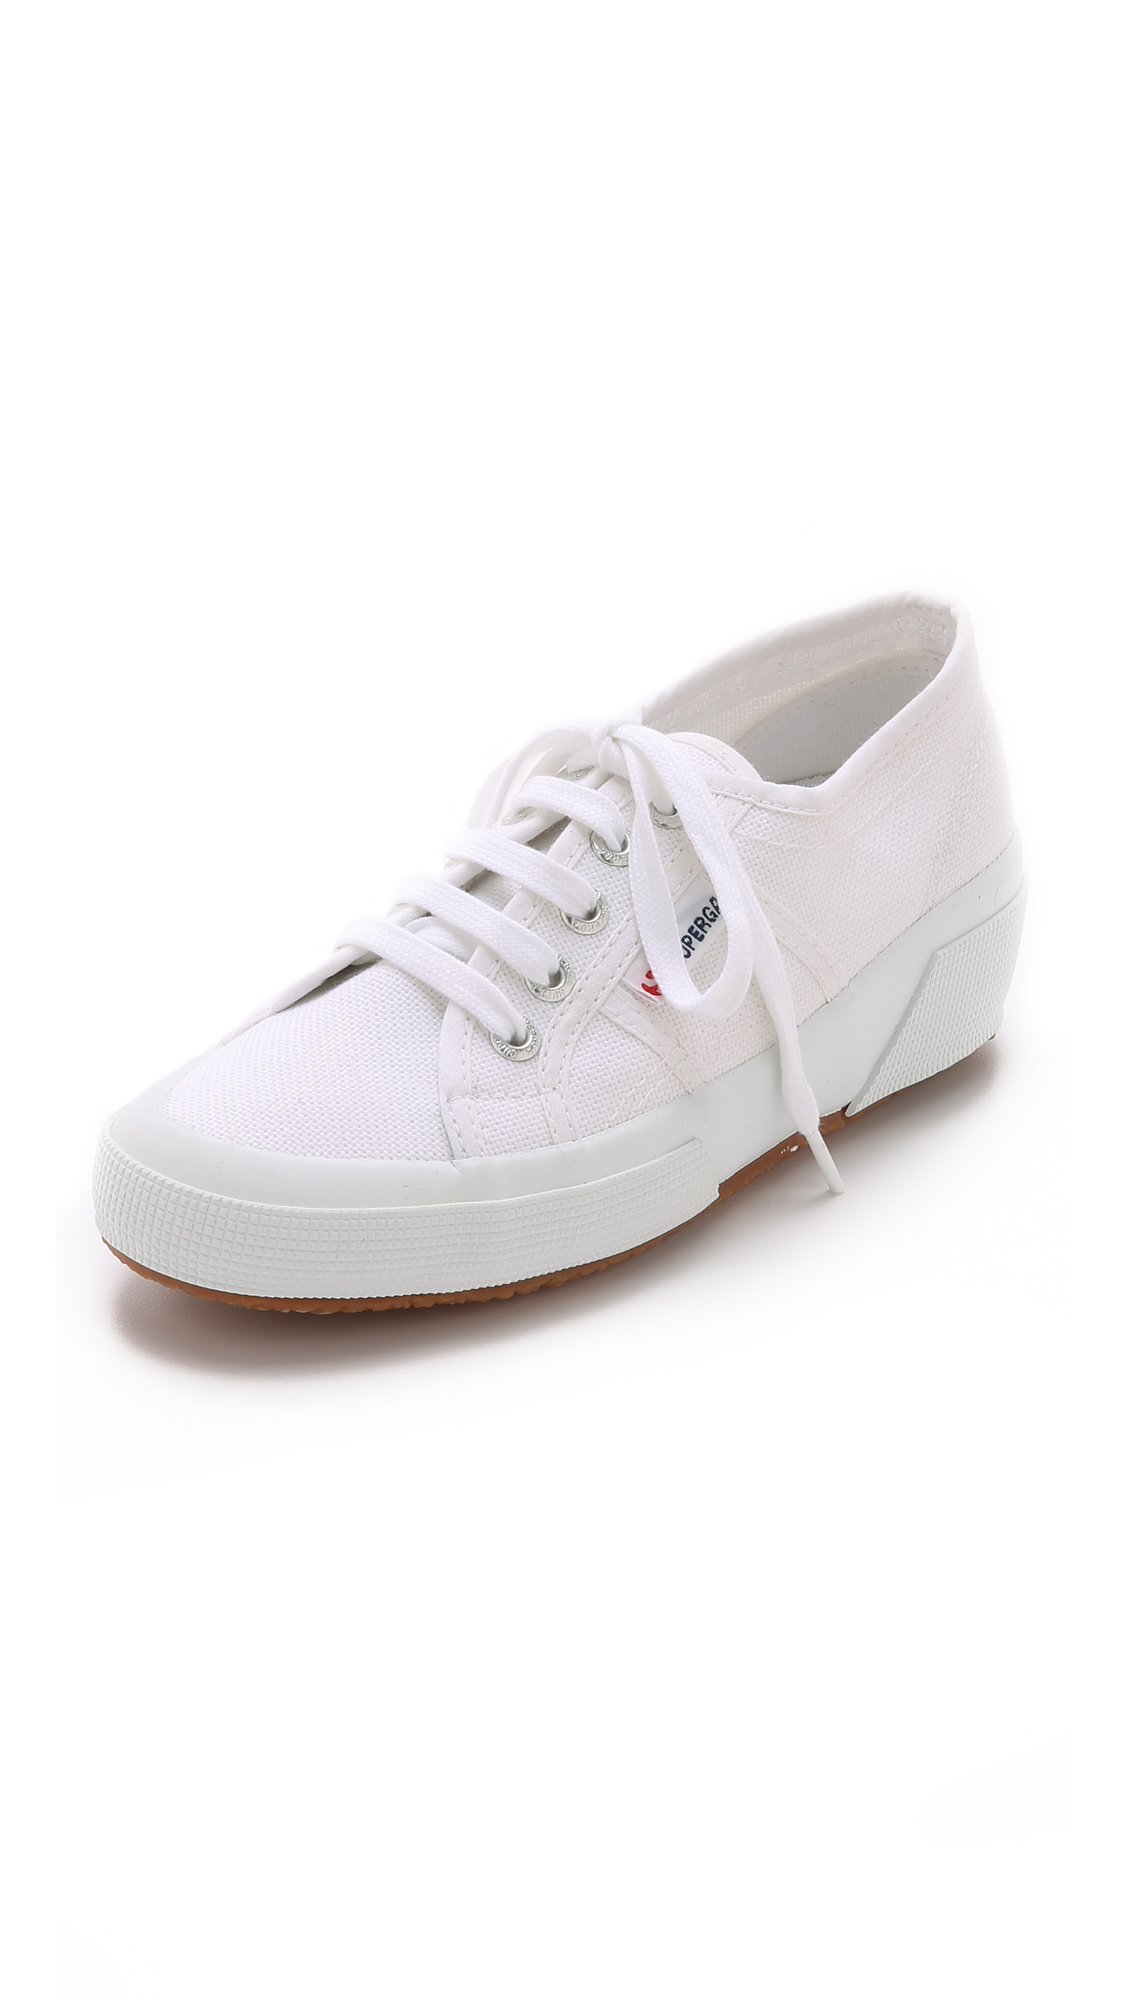 Superga 2904 Cotu Wedge Sneakers - White in White | Lyst